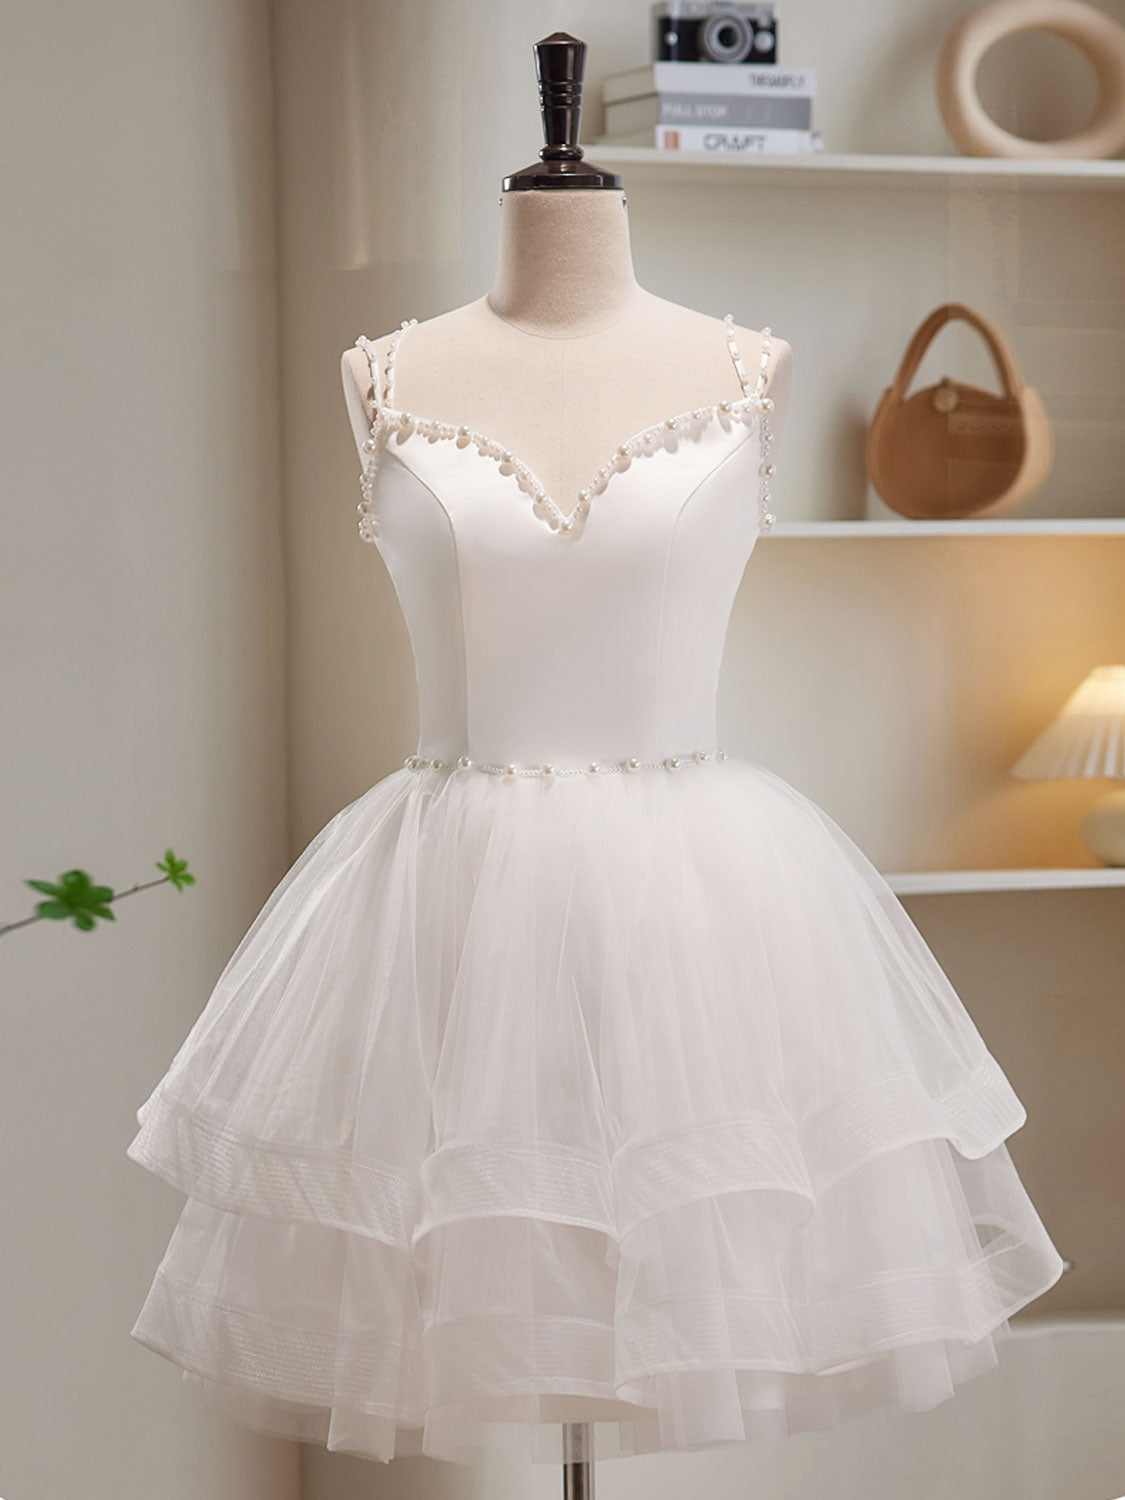 Cute Tiered White Short Homecoming Dress Formal Dress - DollyGown